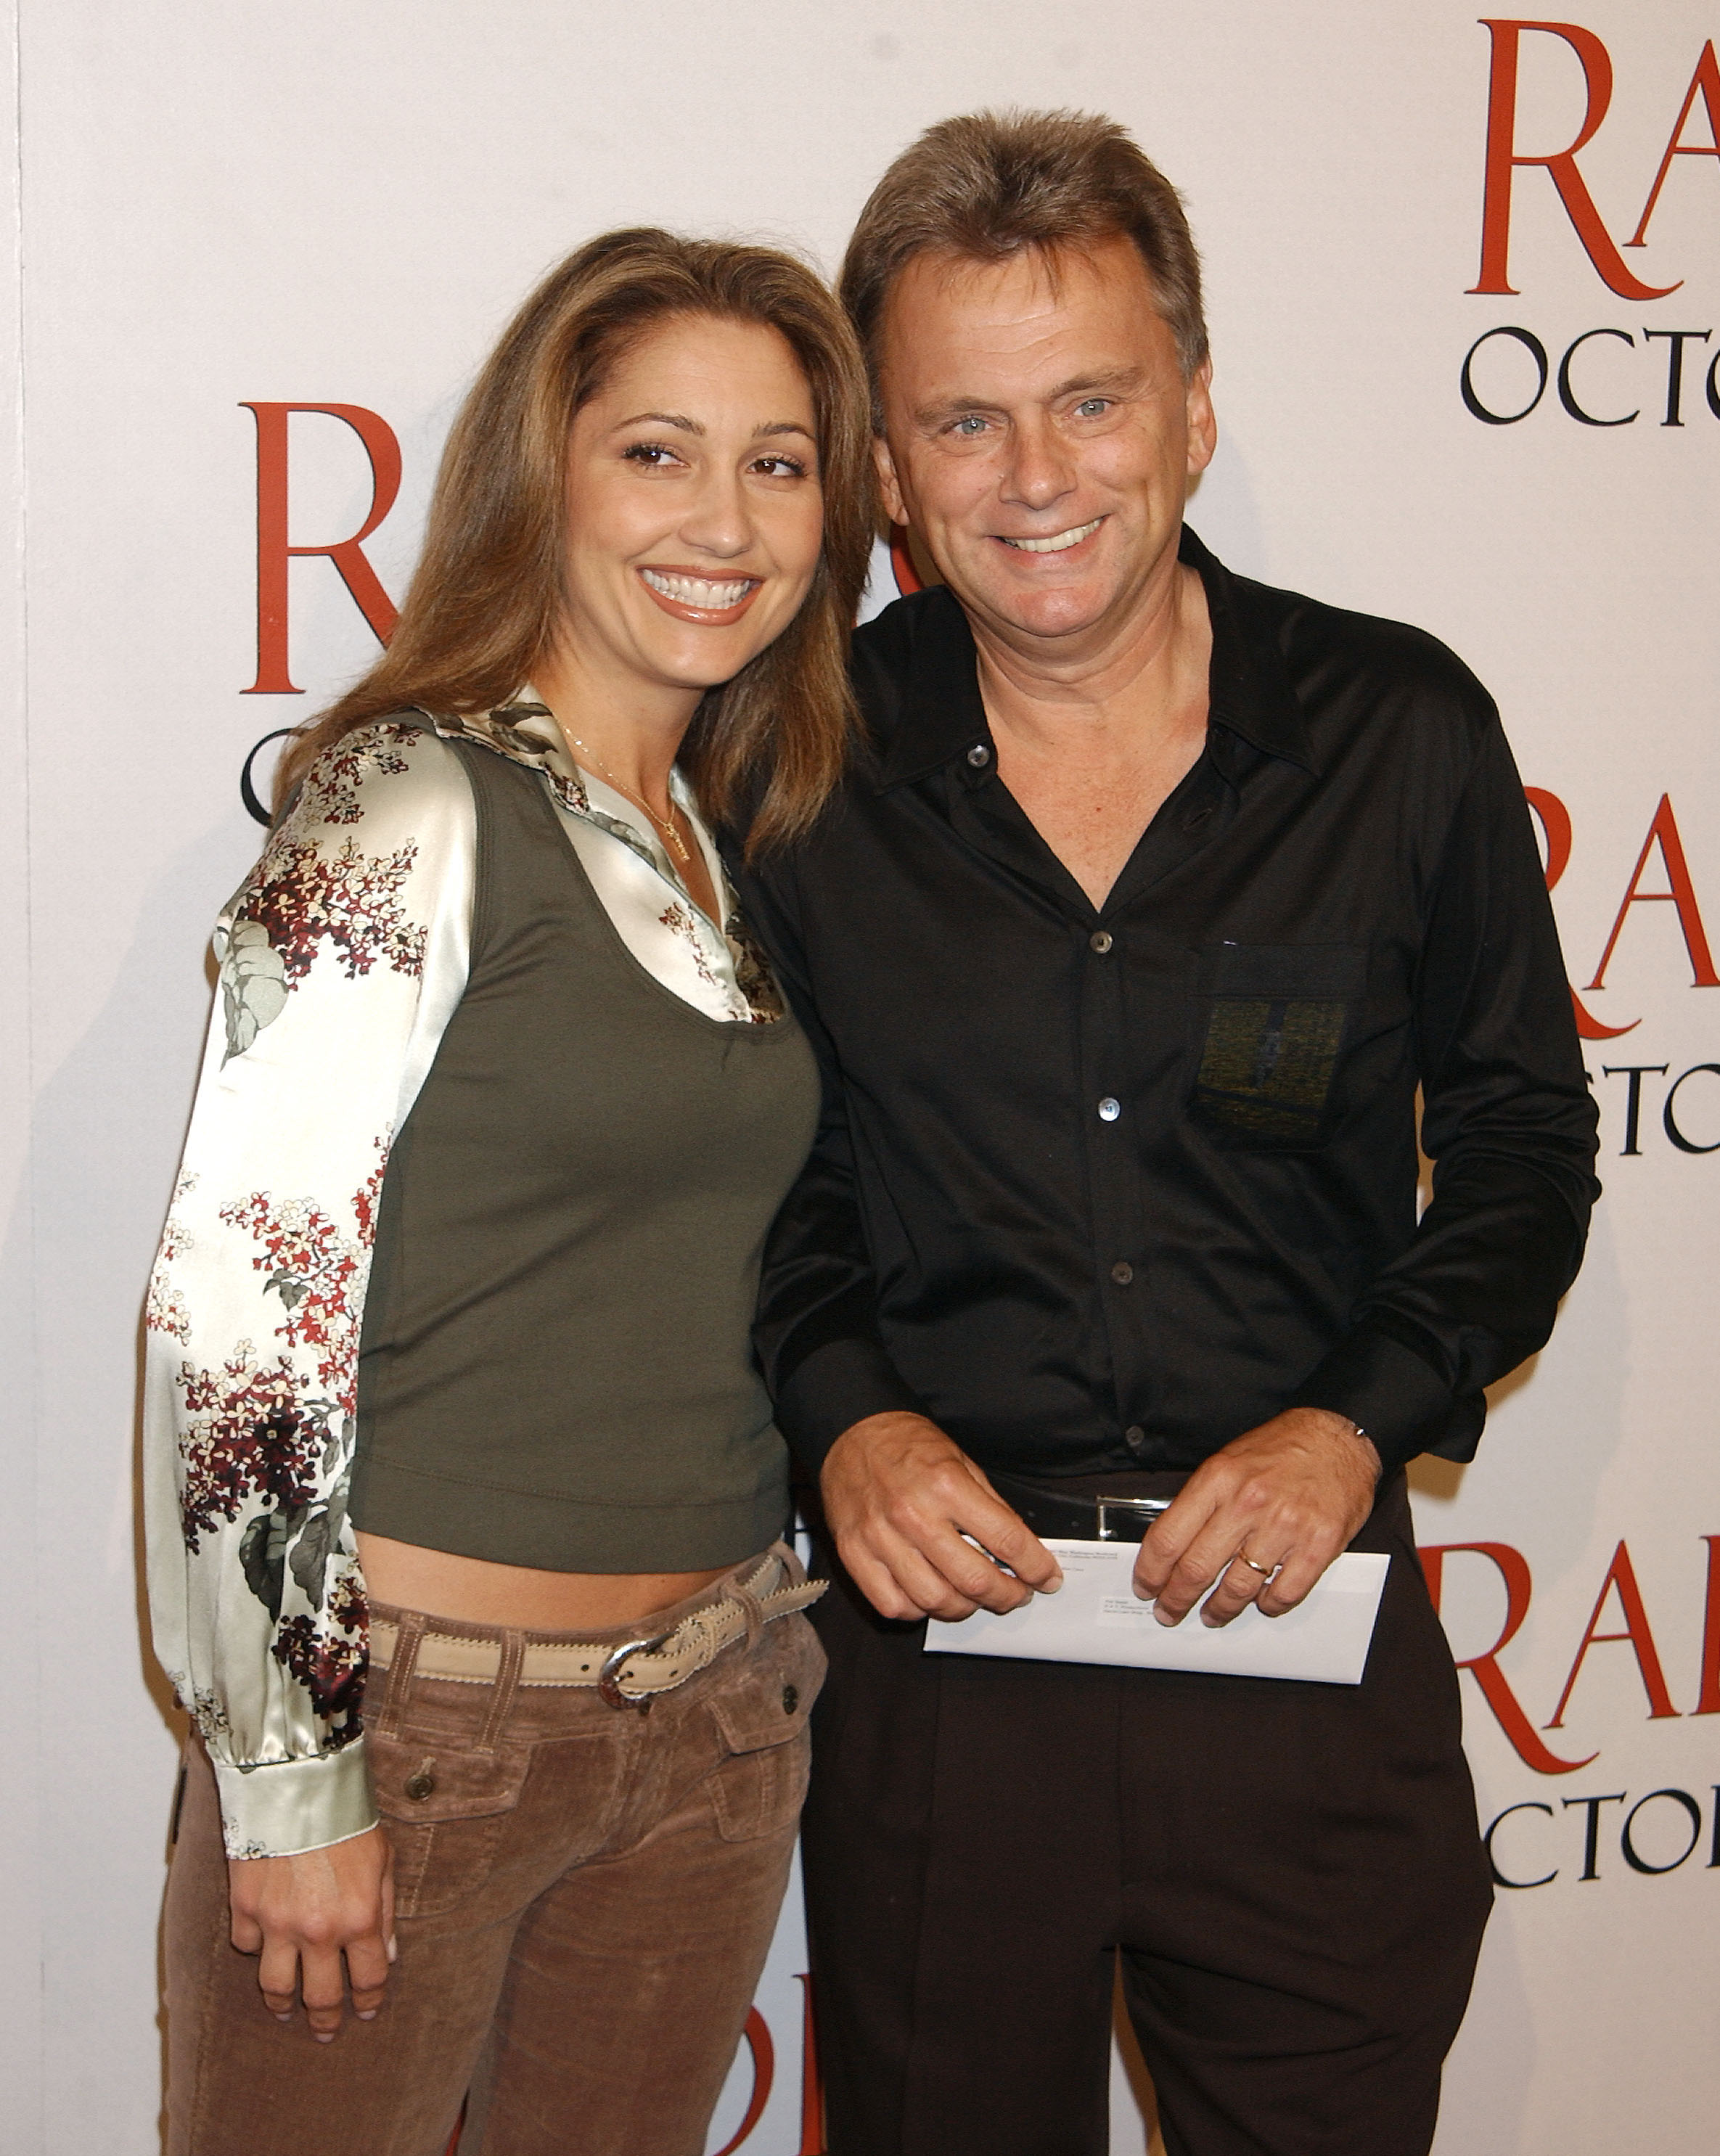 Pat Sajak and Lesly Brown at the "Radio" premiere in October 2003 | Source: Getty Images